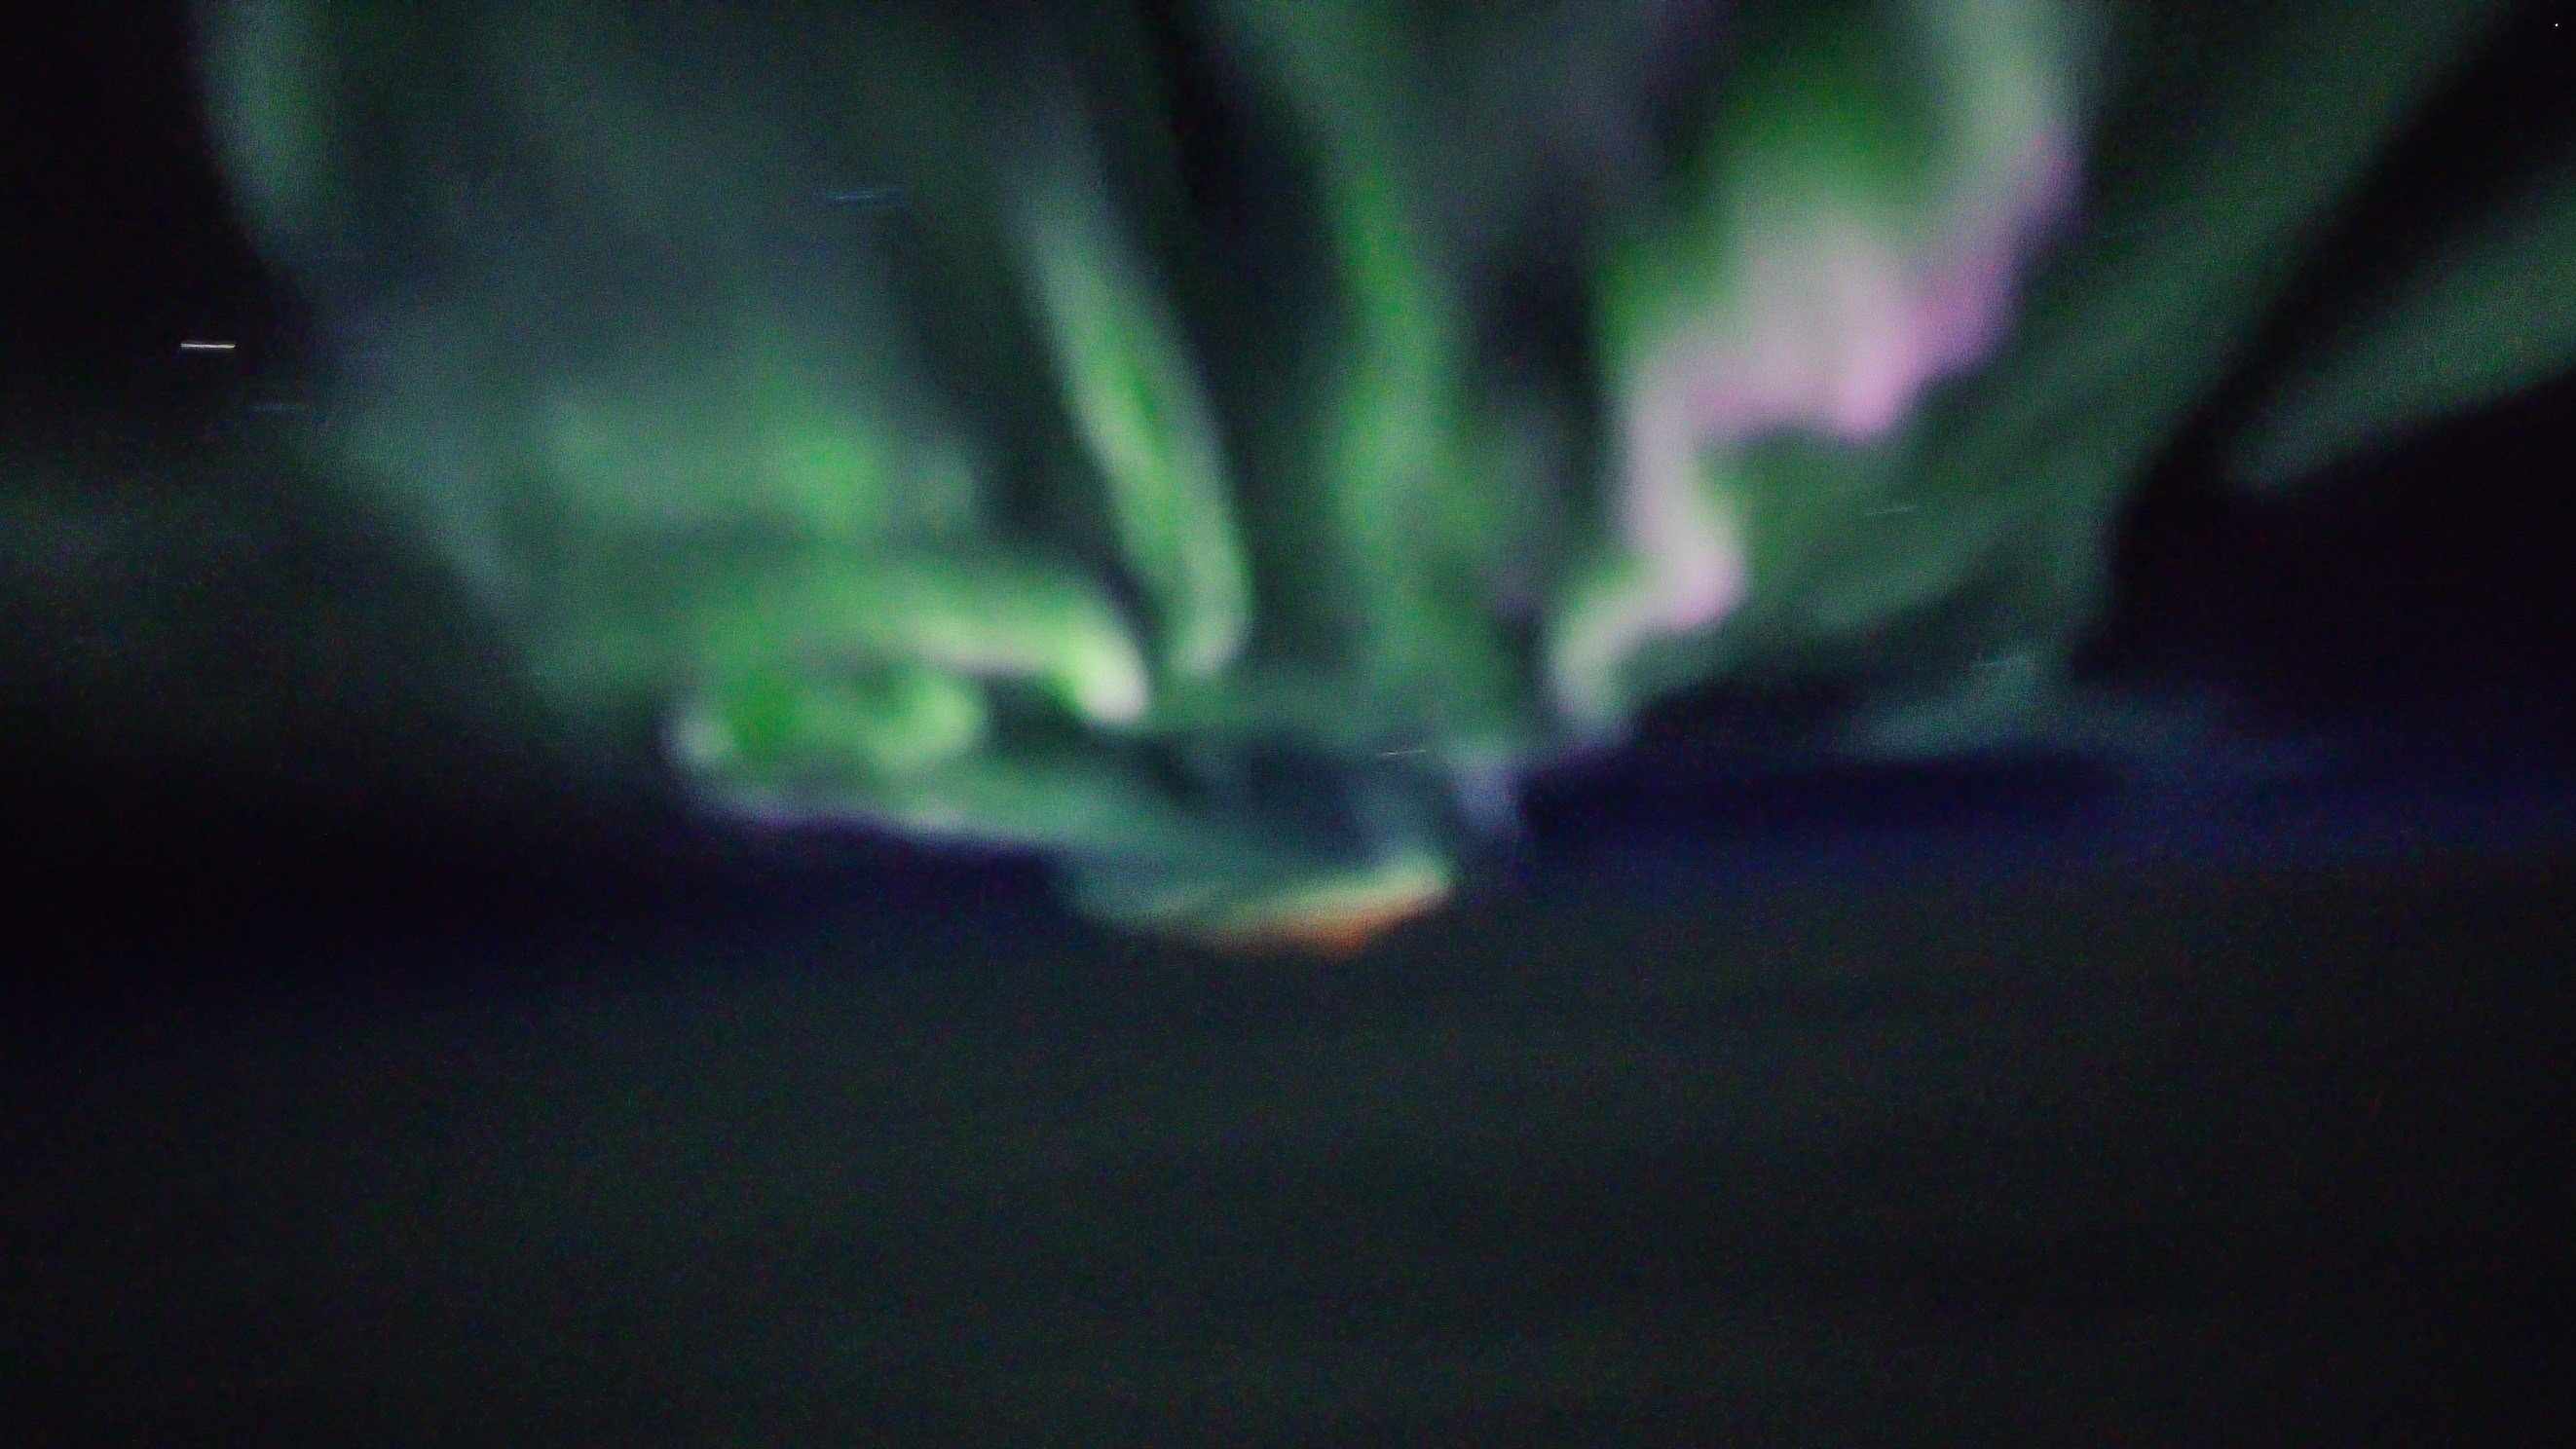 These Guys Launched a Sony a7S Into the Stratosphere to Shoot the Aurora